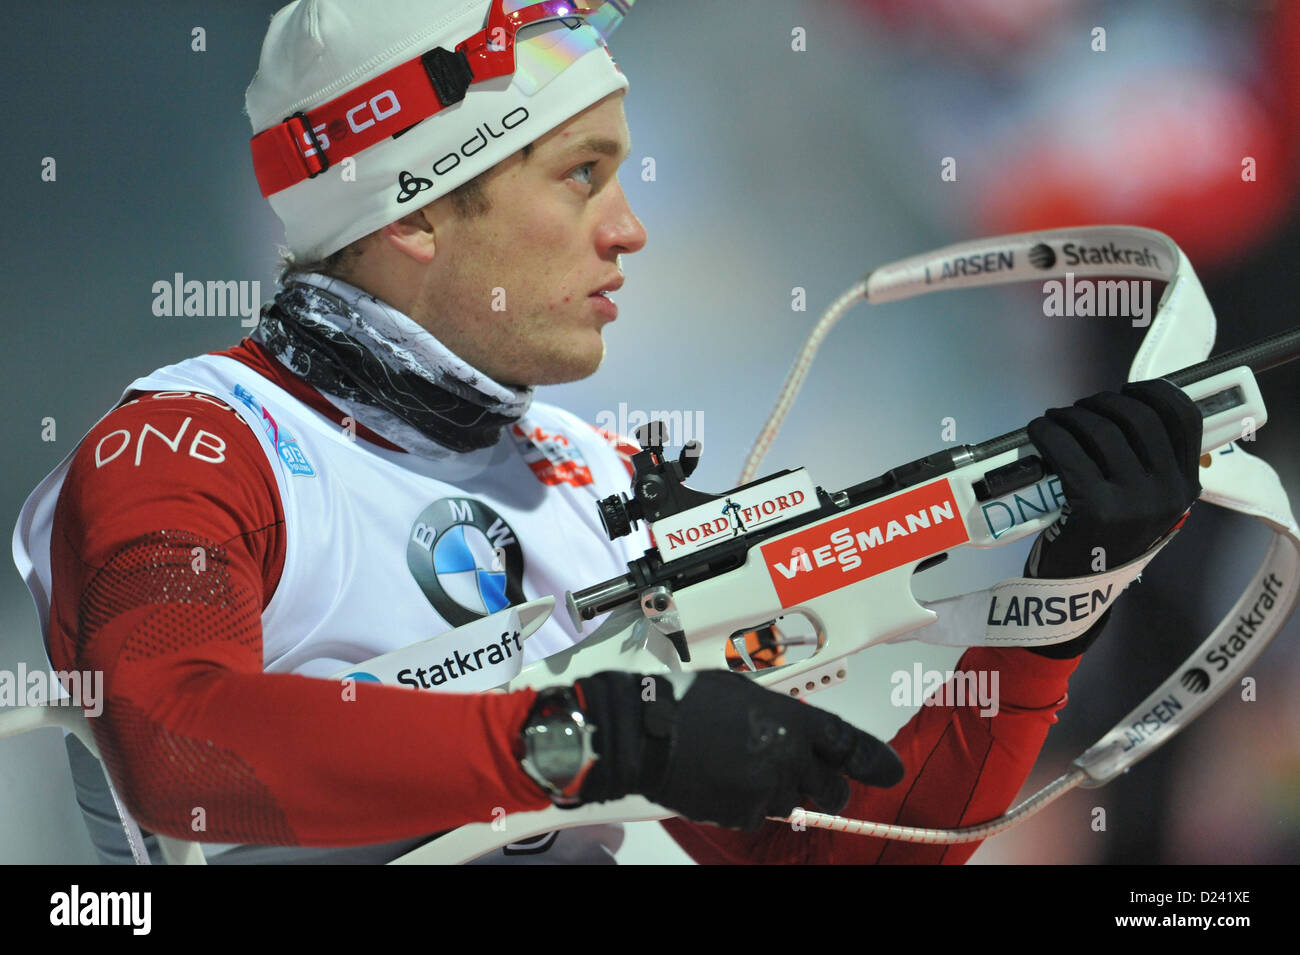 Norwegian biathlete Tarjei Boe stands at the shooting range during the men's 10 km sprint race of the Biathlon World Cup at Chiemgau Arena in Ruhpolding, Germany, 12 January 2013. Photo: Andreas Gebert Stock Photo